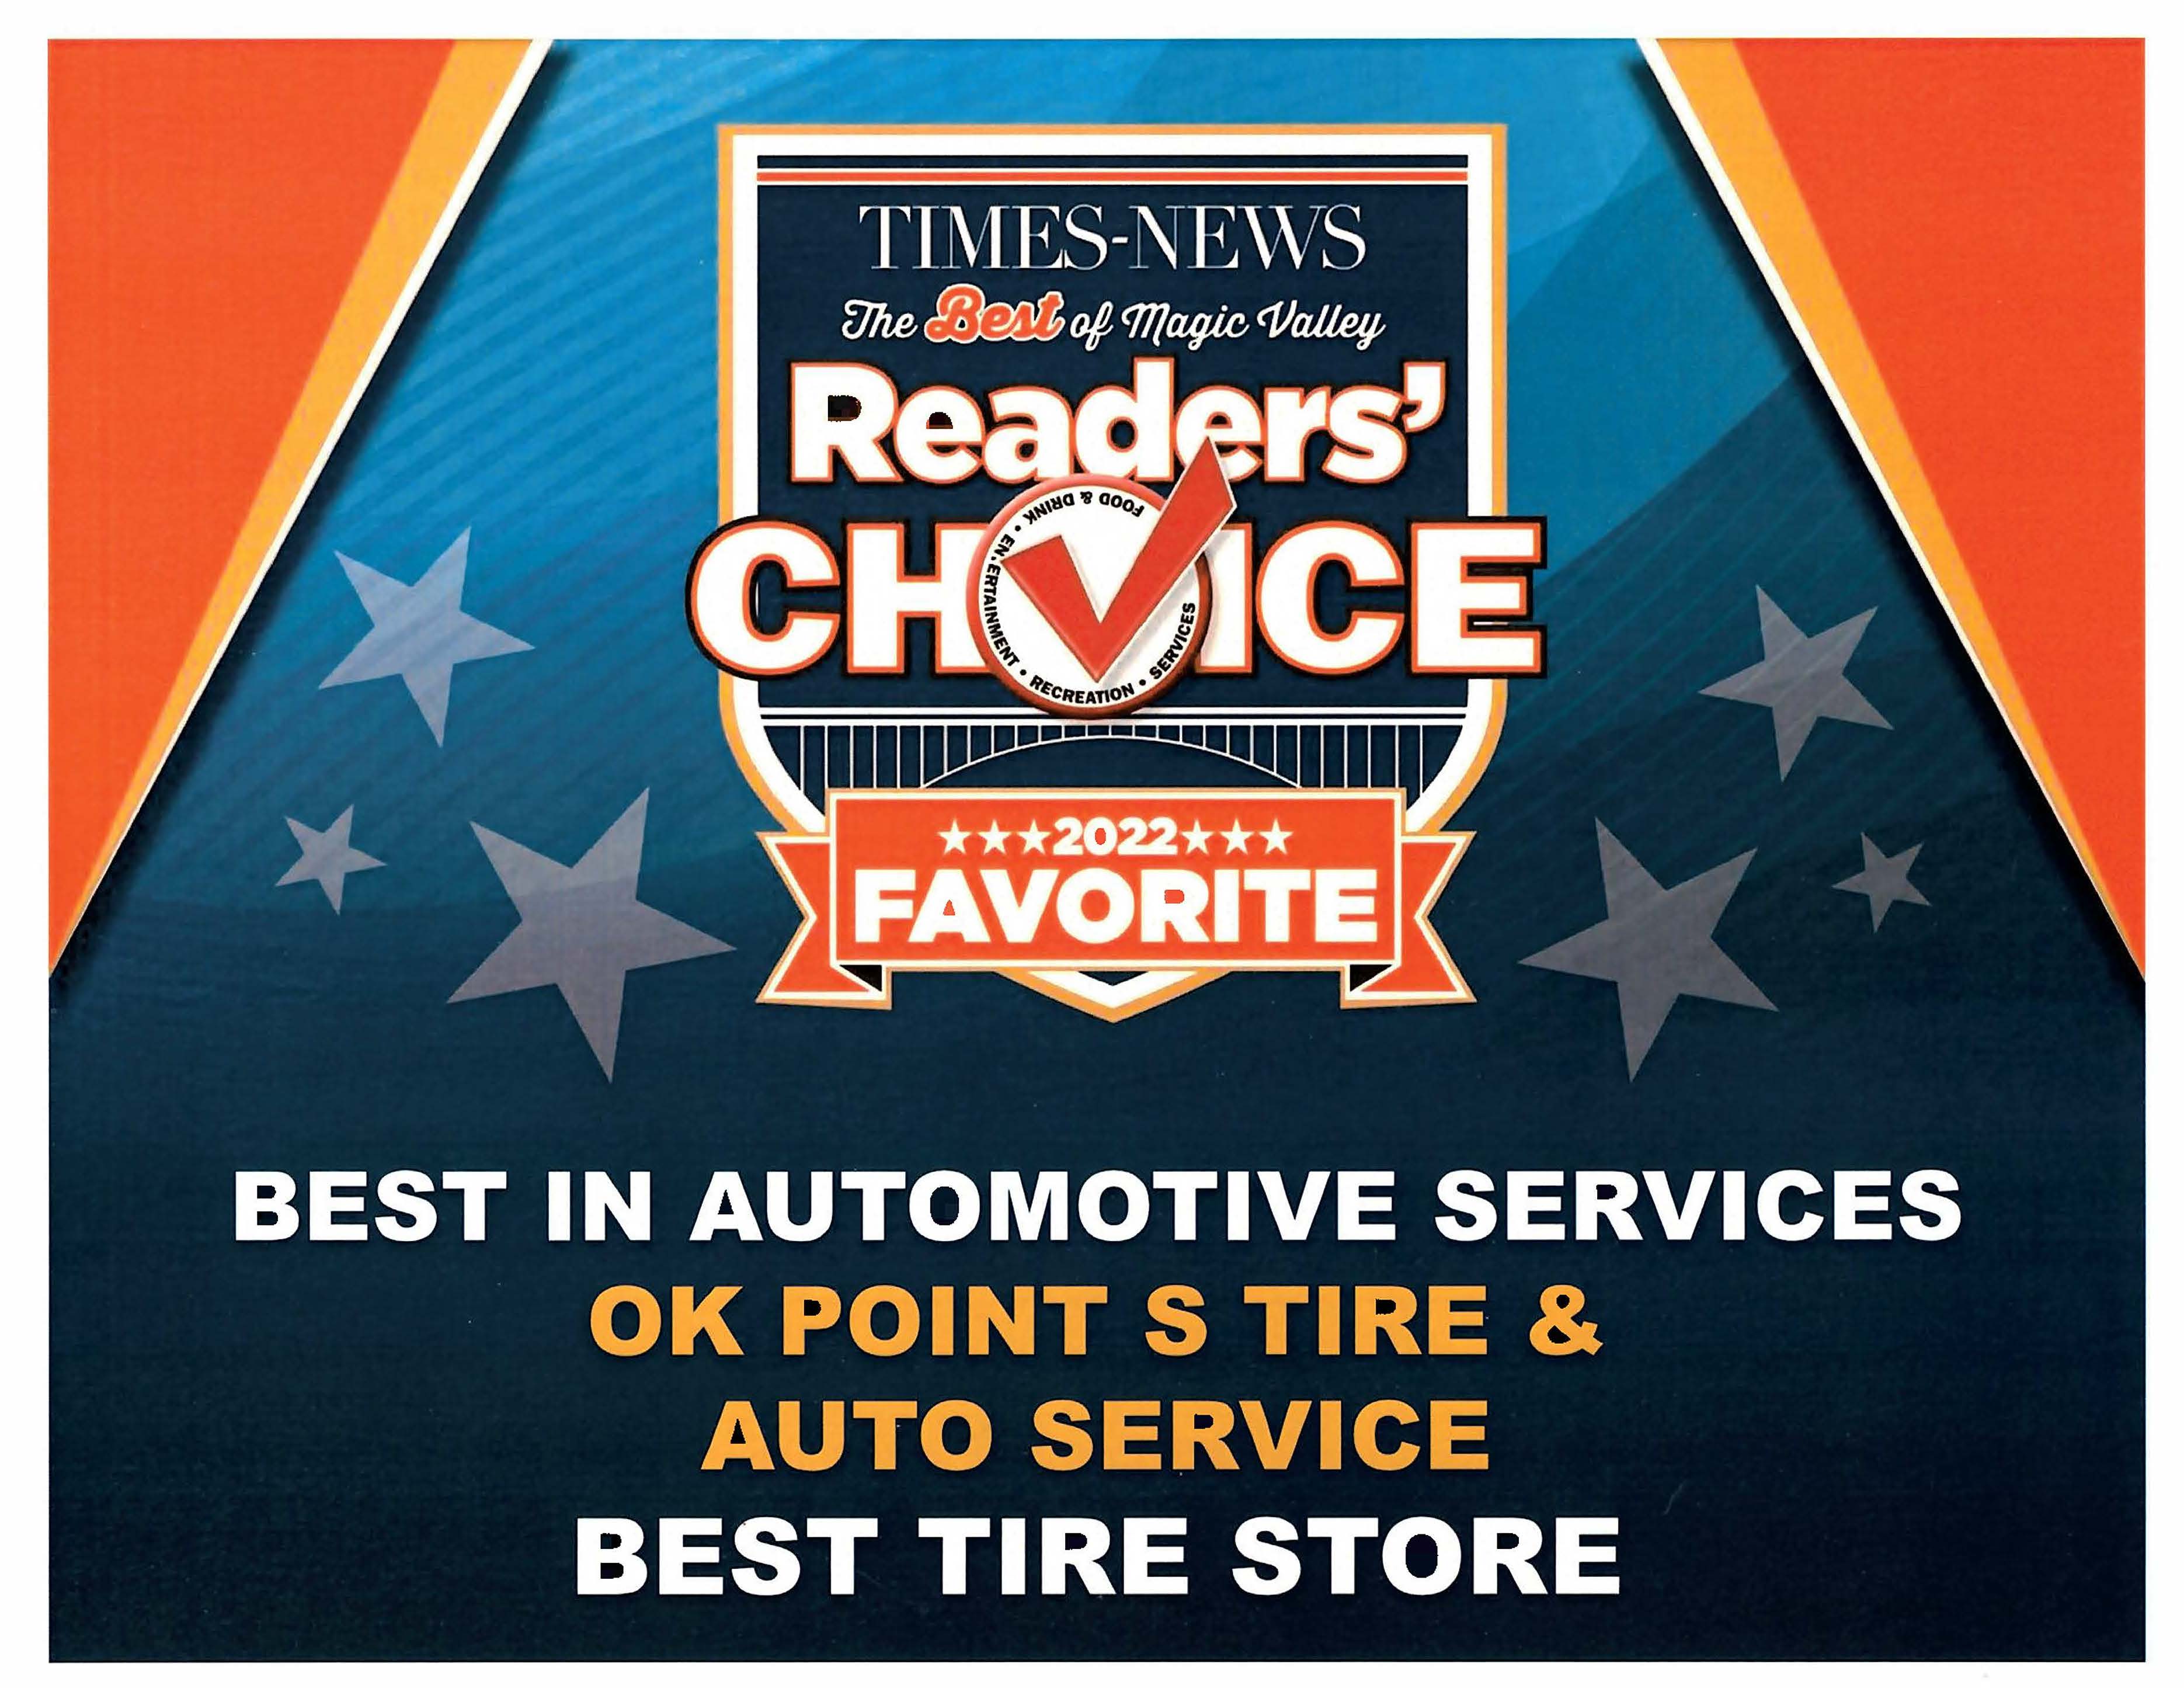 We are proud to have been chosen as Magic Valley's Best Tire Store! Thank you all for the support!